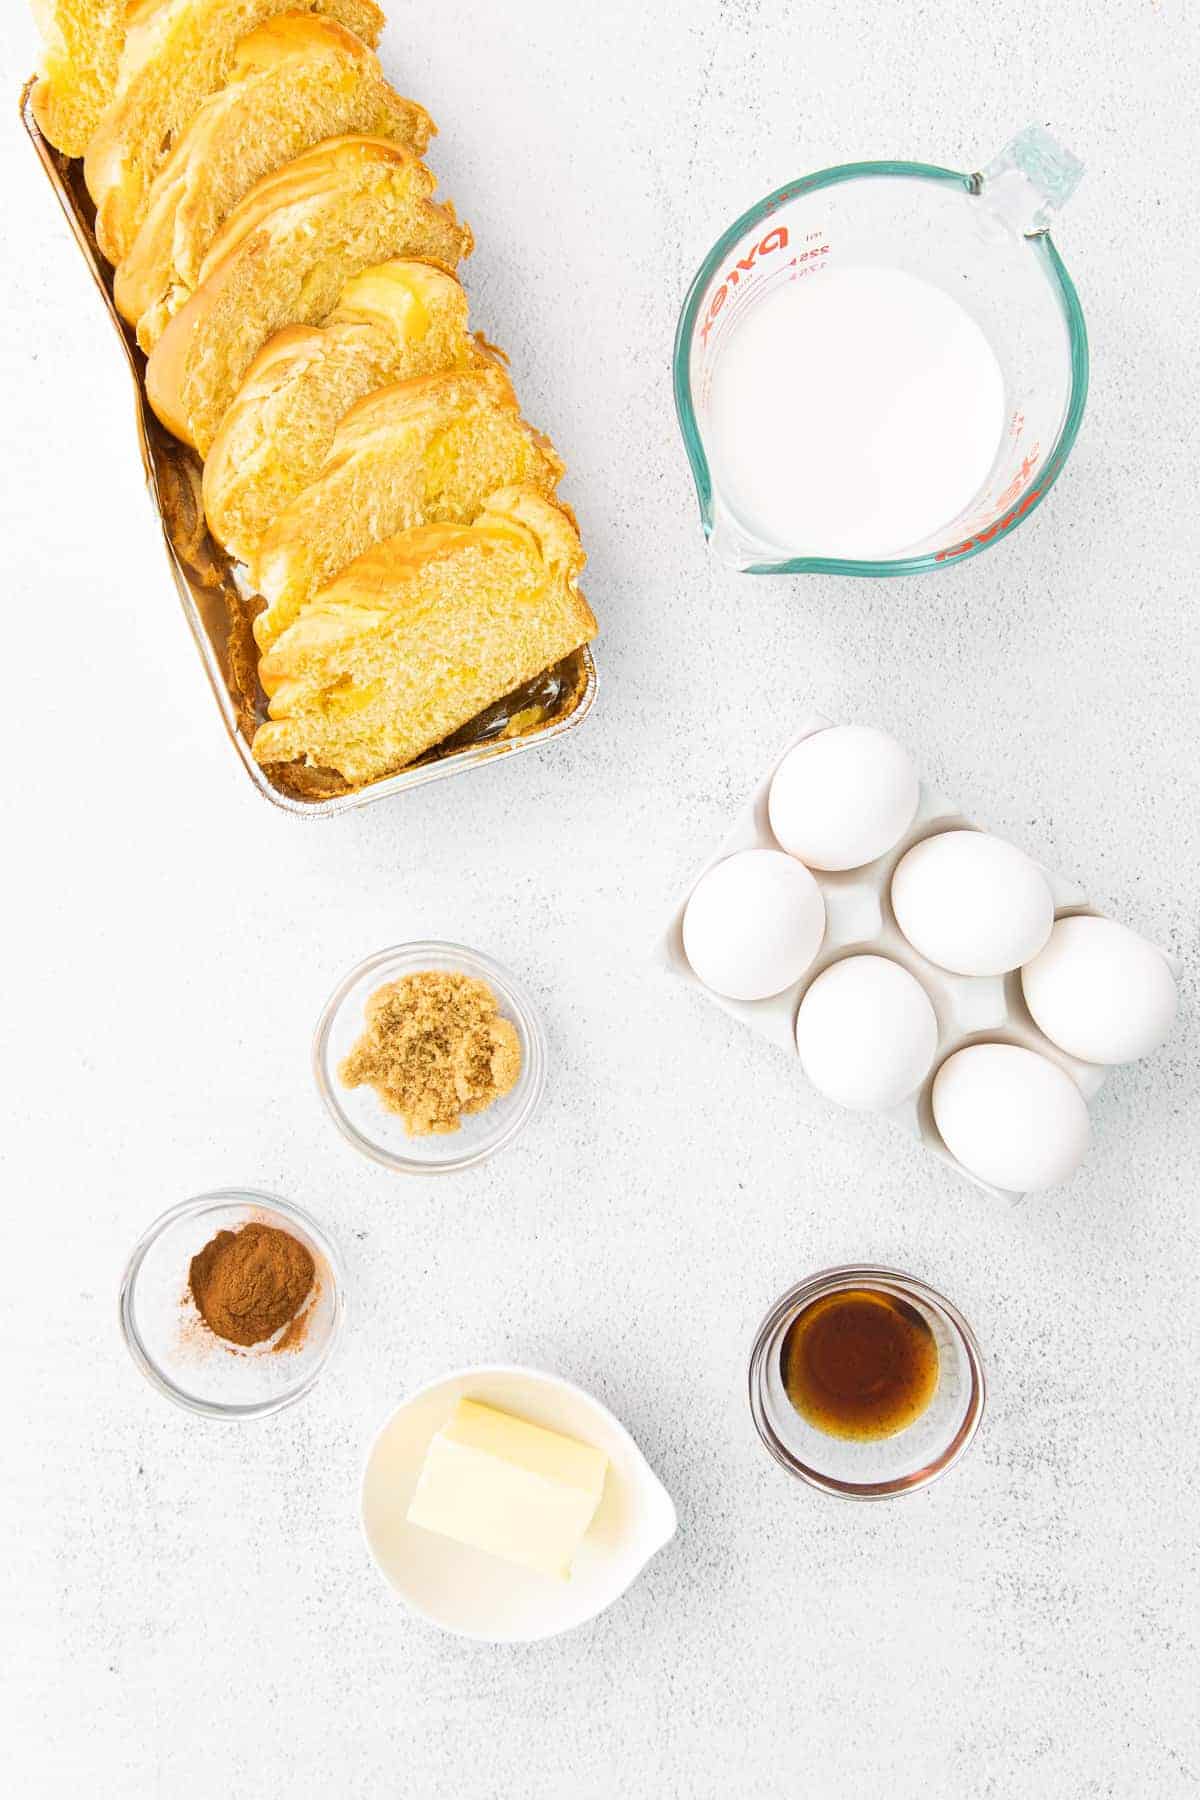 https://fitfoodiefinds.com/wp-content/uploads/2021/04/French-Toast-02.jpg